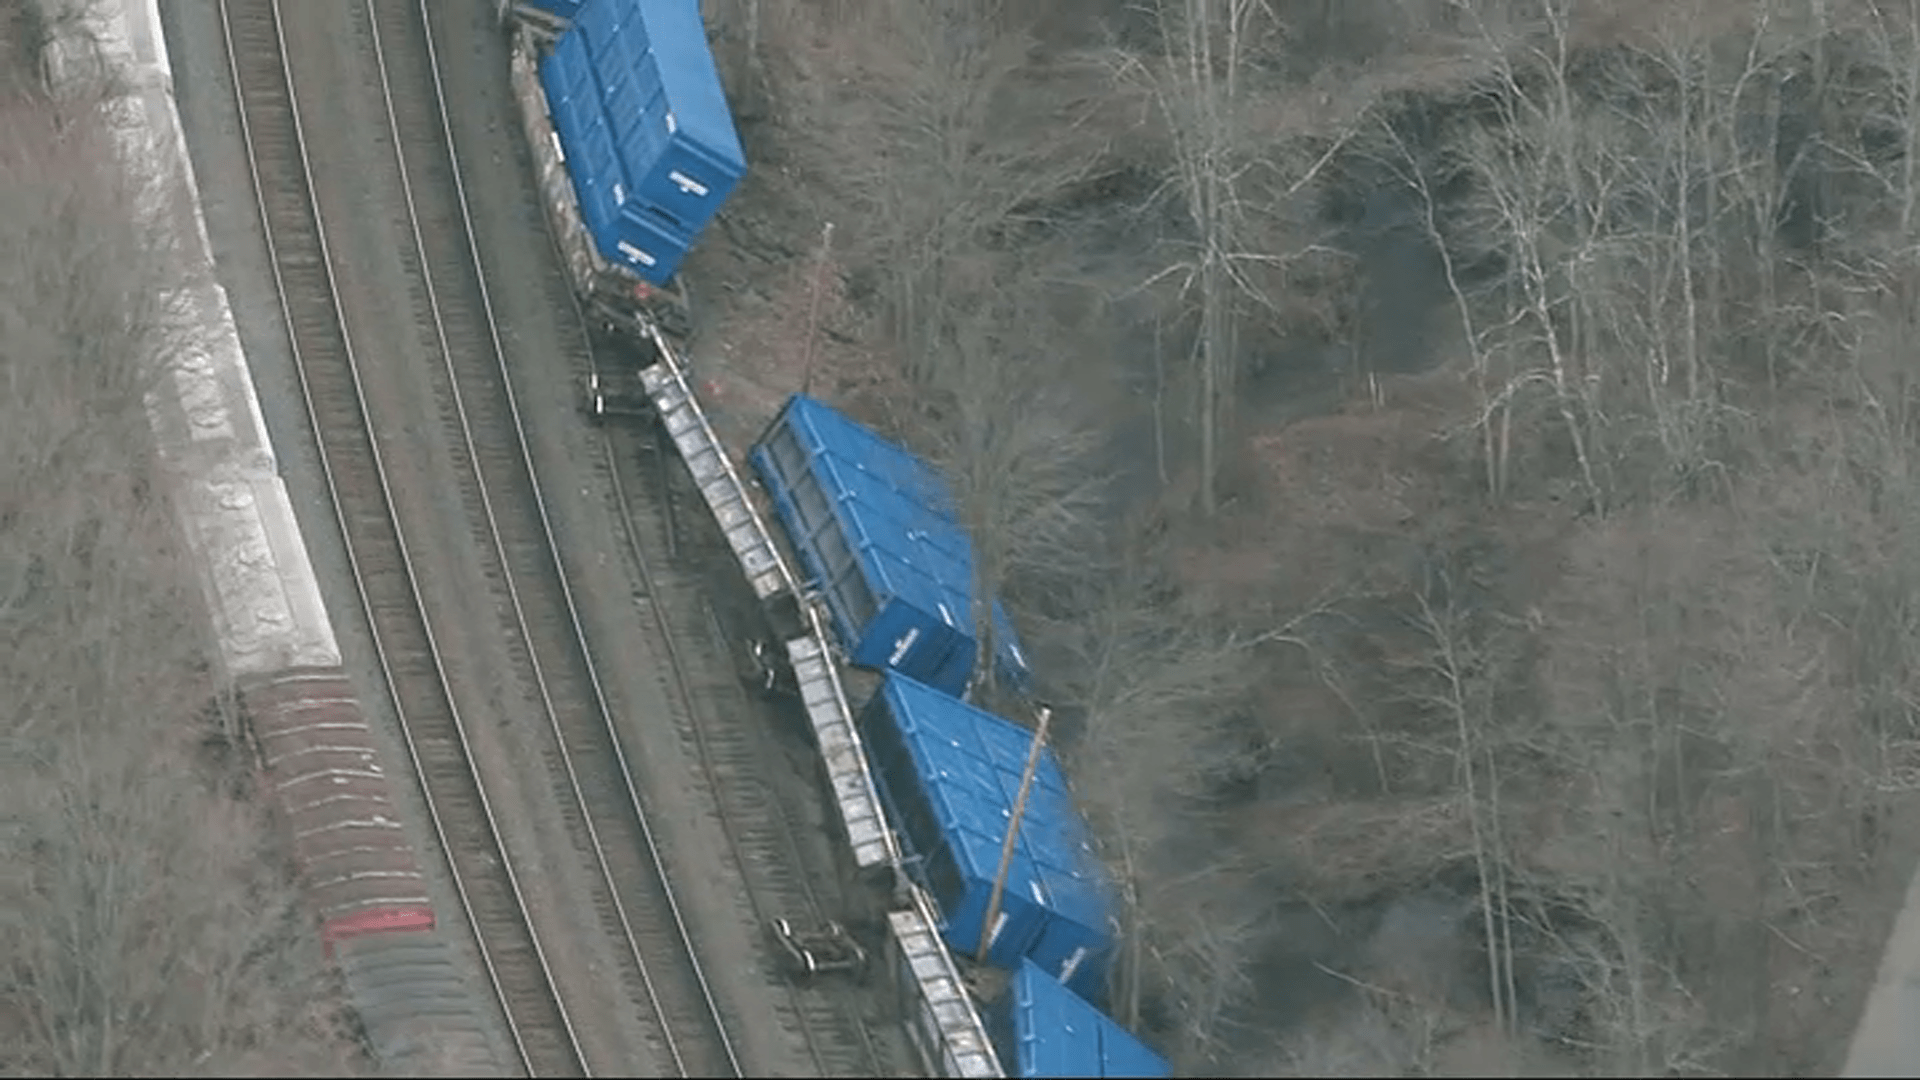 A derailed freight train in Ayer, Massachusetts, on Thursday, March 23, 2023.